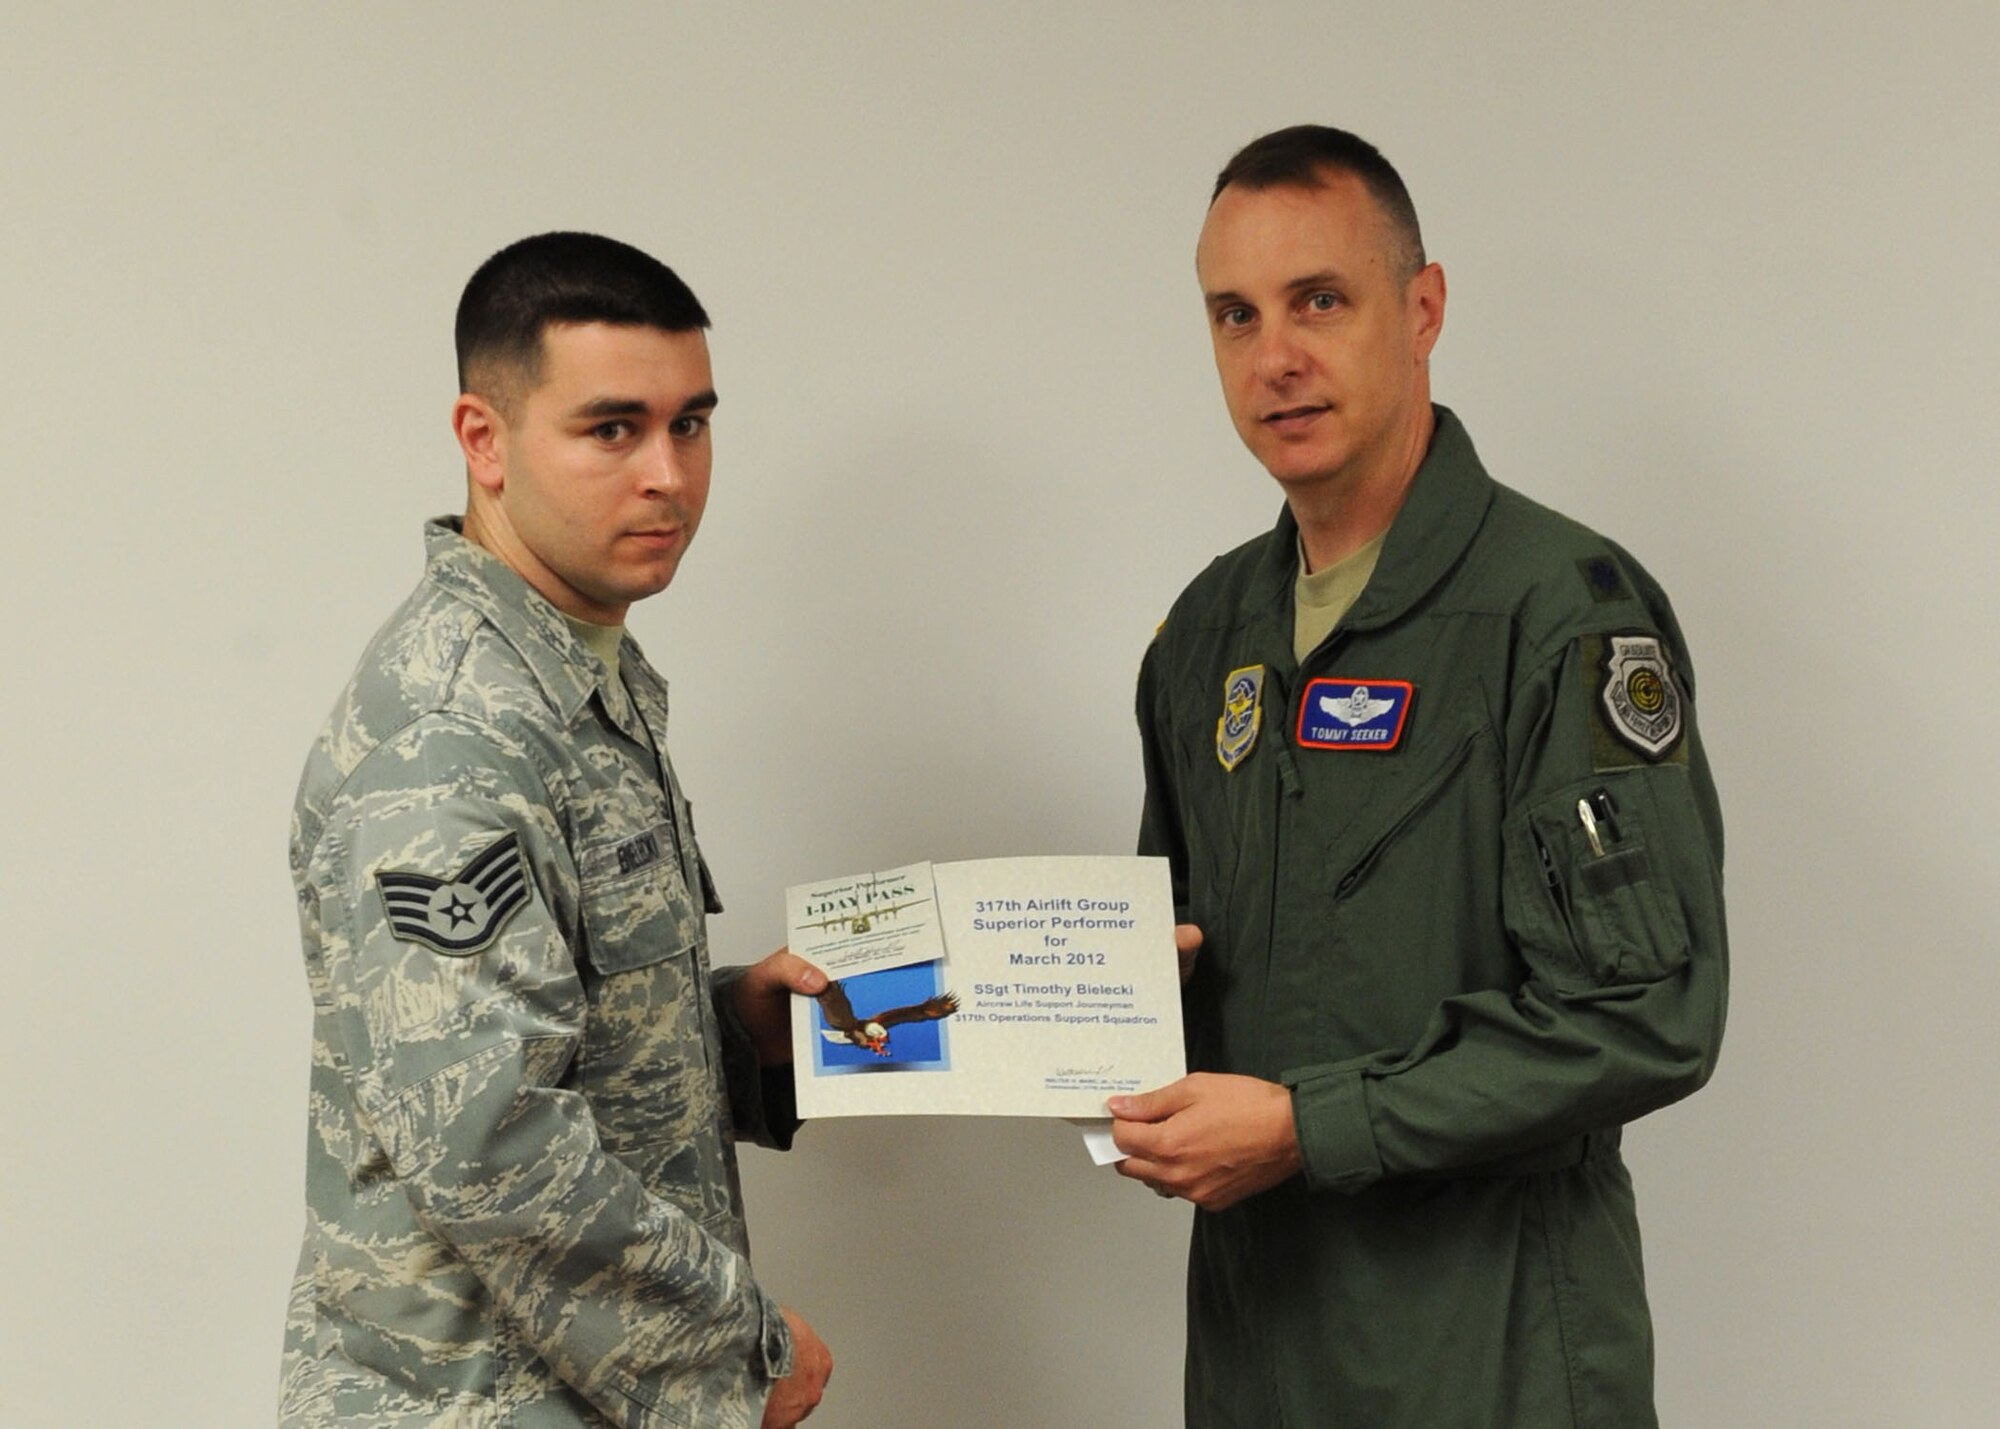 U.S. Air Force Staff Sgt. Tim Bielecki, 317th Airlift Group, receives the 317th AG’s superior performer of the month award from Lt. Col. Thomas Seeker 317th AG deputy commander April 12, 2012, at Dyess Air Force Base, Texas. Bielecki was recognized for reorganizing and cleaning the 317th Operation Support Squadron’s aircrew flight equipment shop which improved functionality. (U.S. Air Force photo by Airman 1st Class Peter Thompson/ Released)